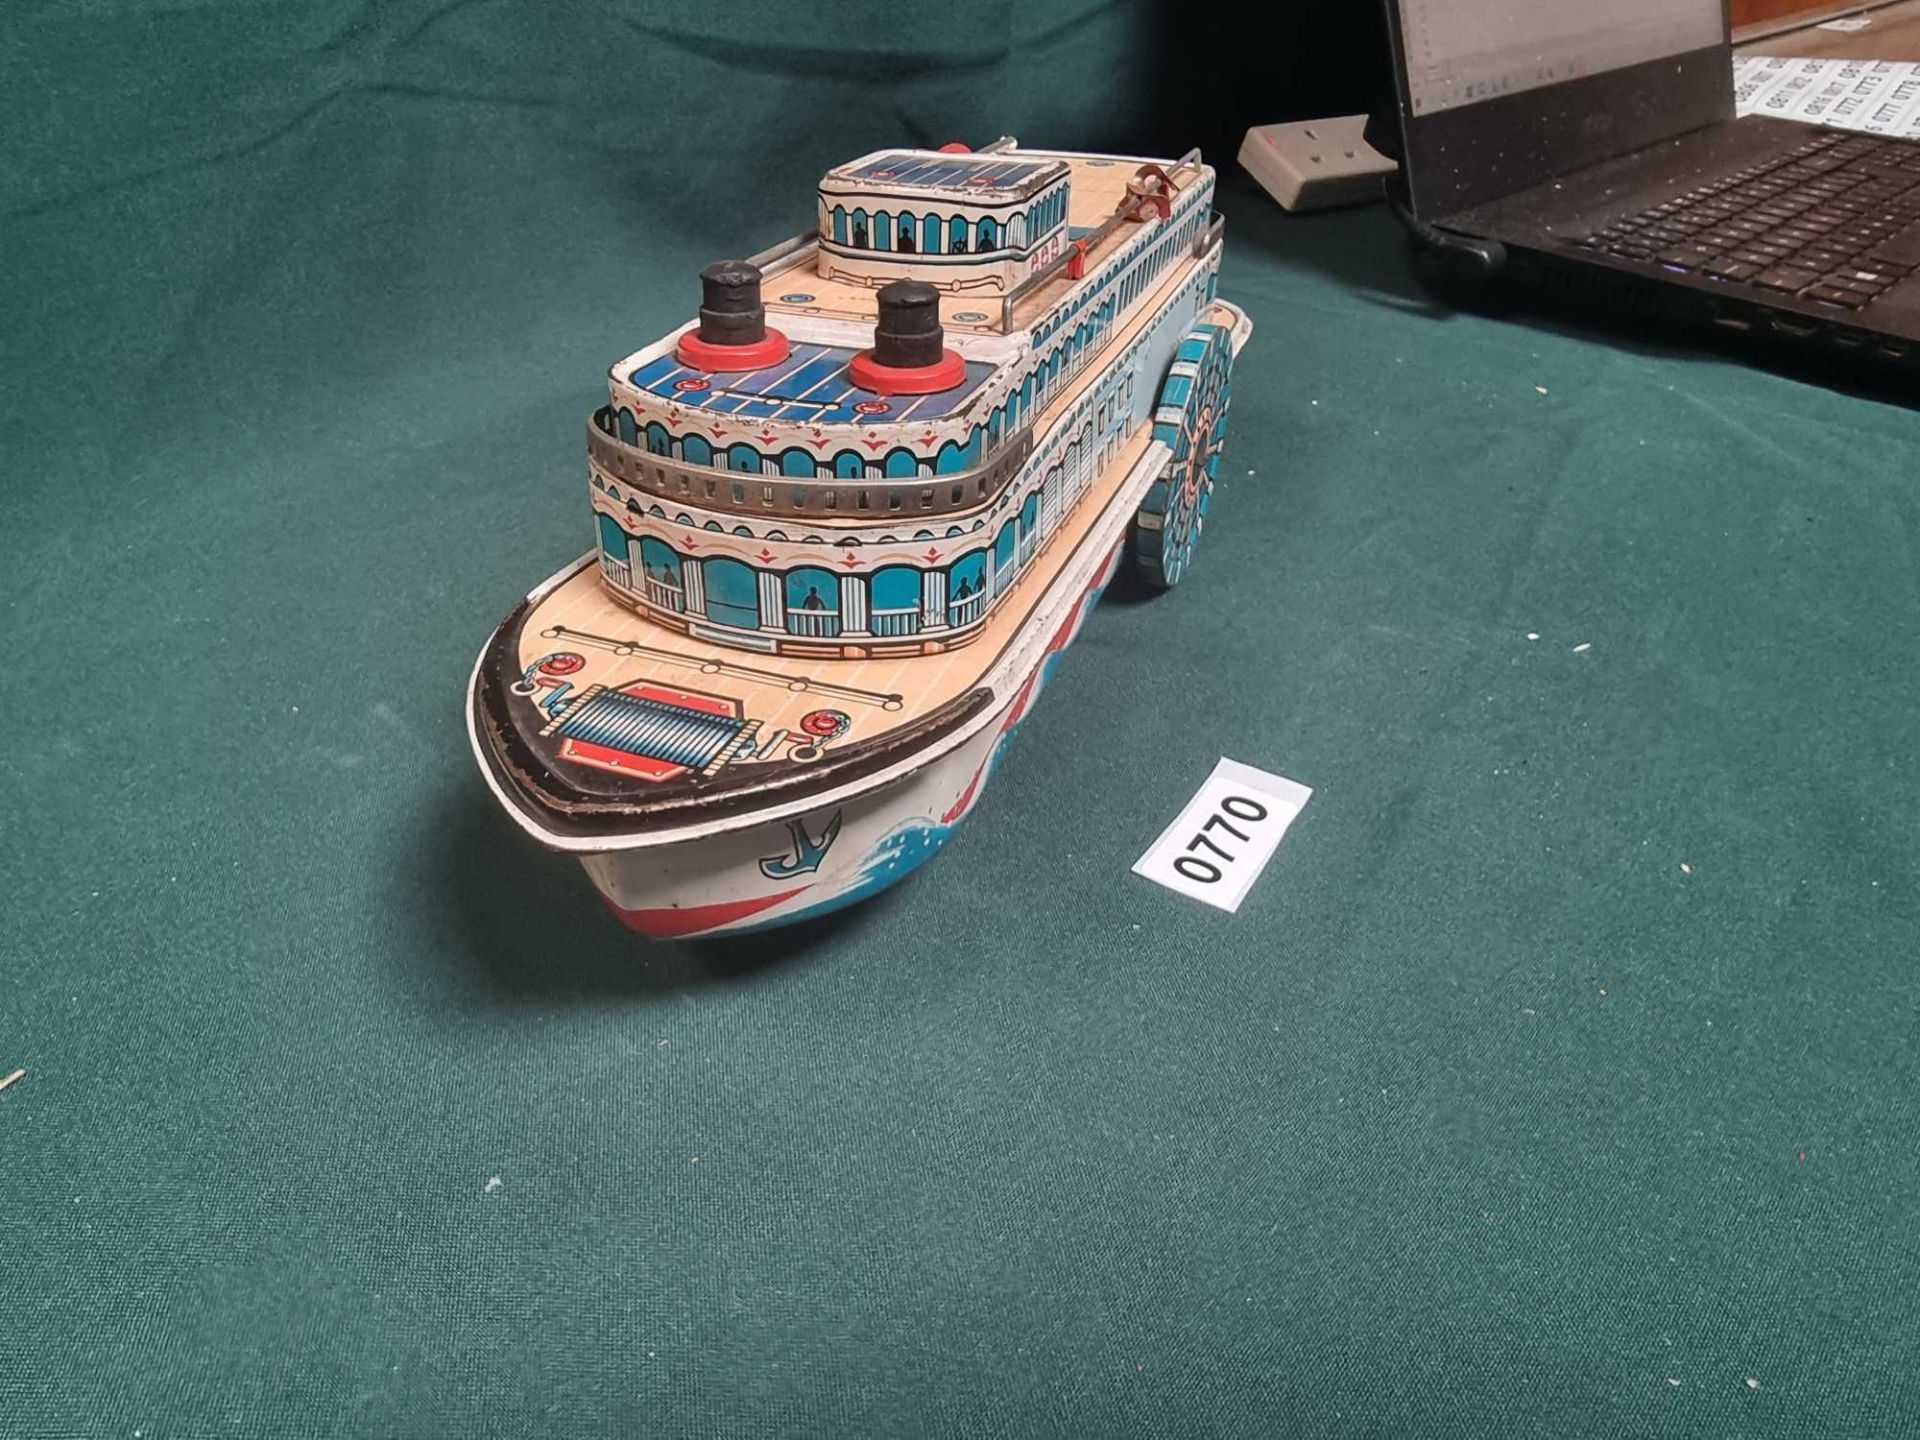 MT Modern Toys Japan Tin Plate Sidewheeler River Steamer Friction Toy Named Queen River (Circa - Image 3 of 5